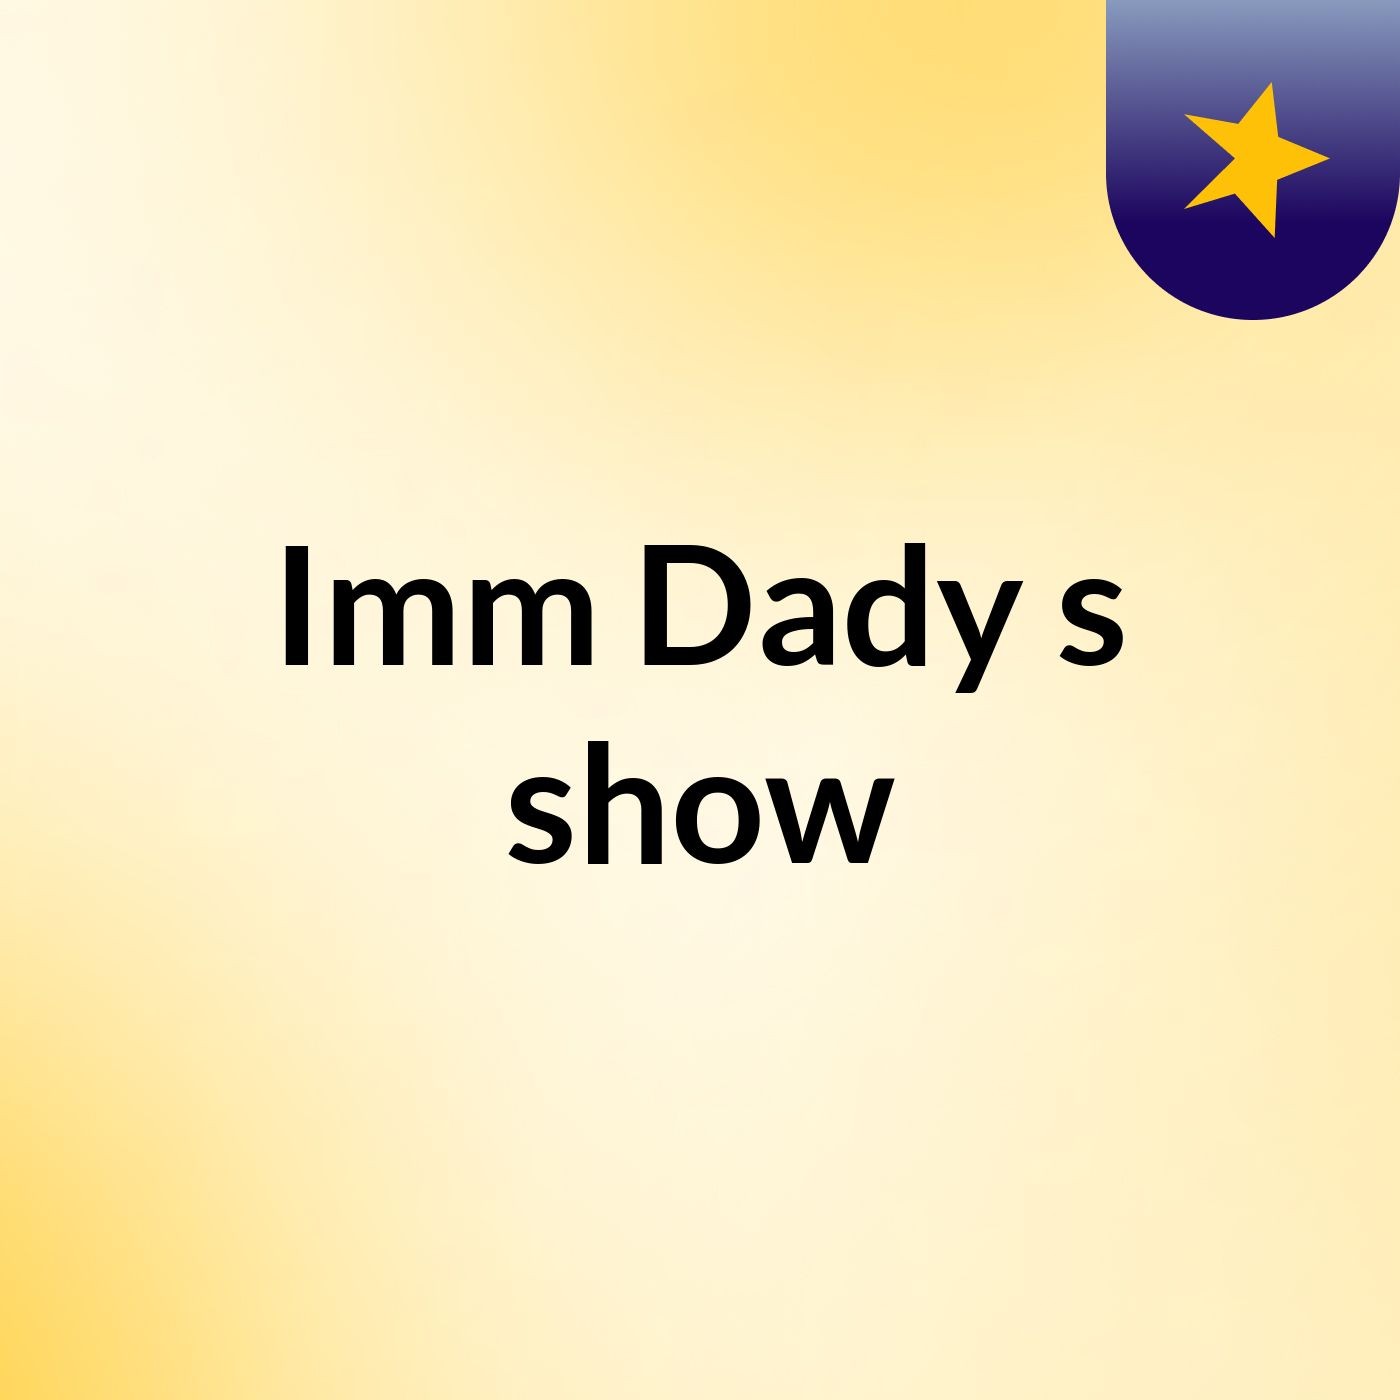 Imm Dady's show